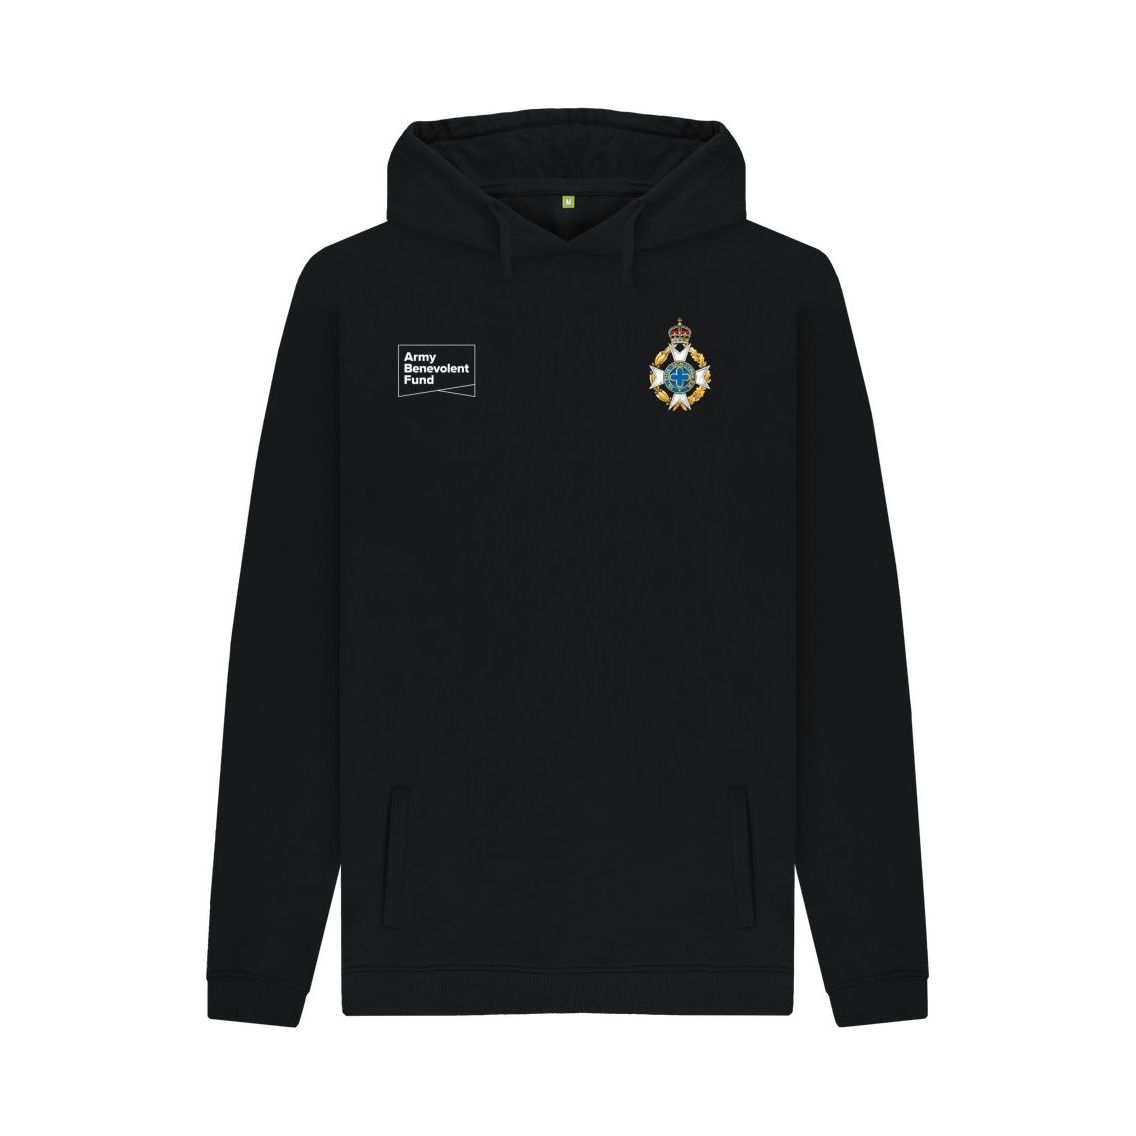 Royal Army Chaplain's Department Unisex Hoodie - Army Benevolent Fund